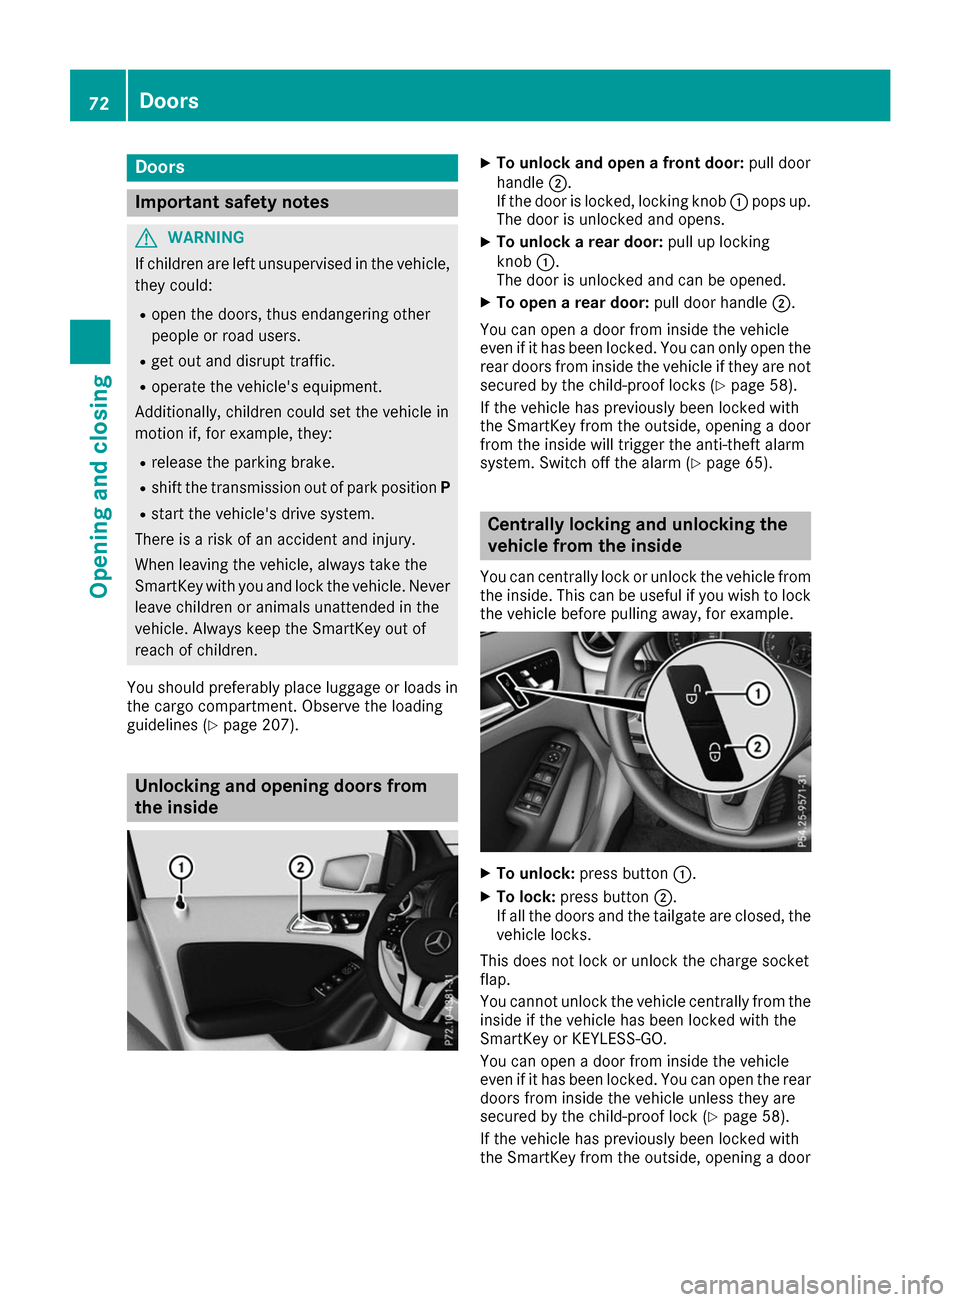 MERCEDES-BENZ B-Class 2017 W246 Manual PDF Doors
Important safety notes
G
WARNING
If children are left unsupervised in the vehicle, they could:
R open the doors, thus endangering other
people or road users.
R get out and disrupt traffic.
R ope